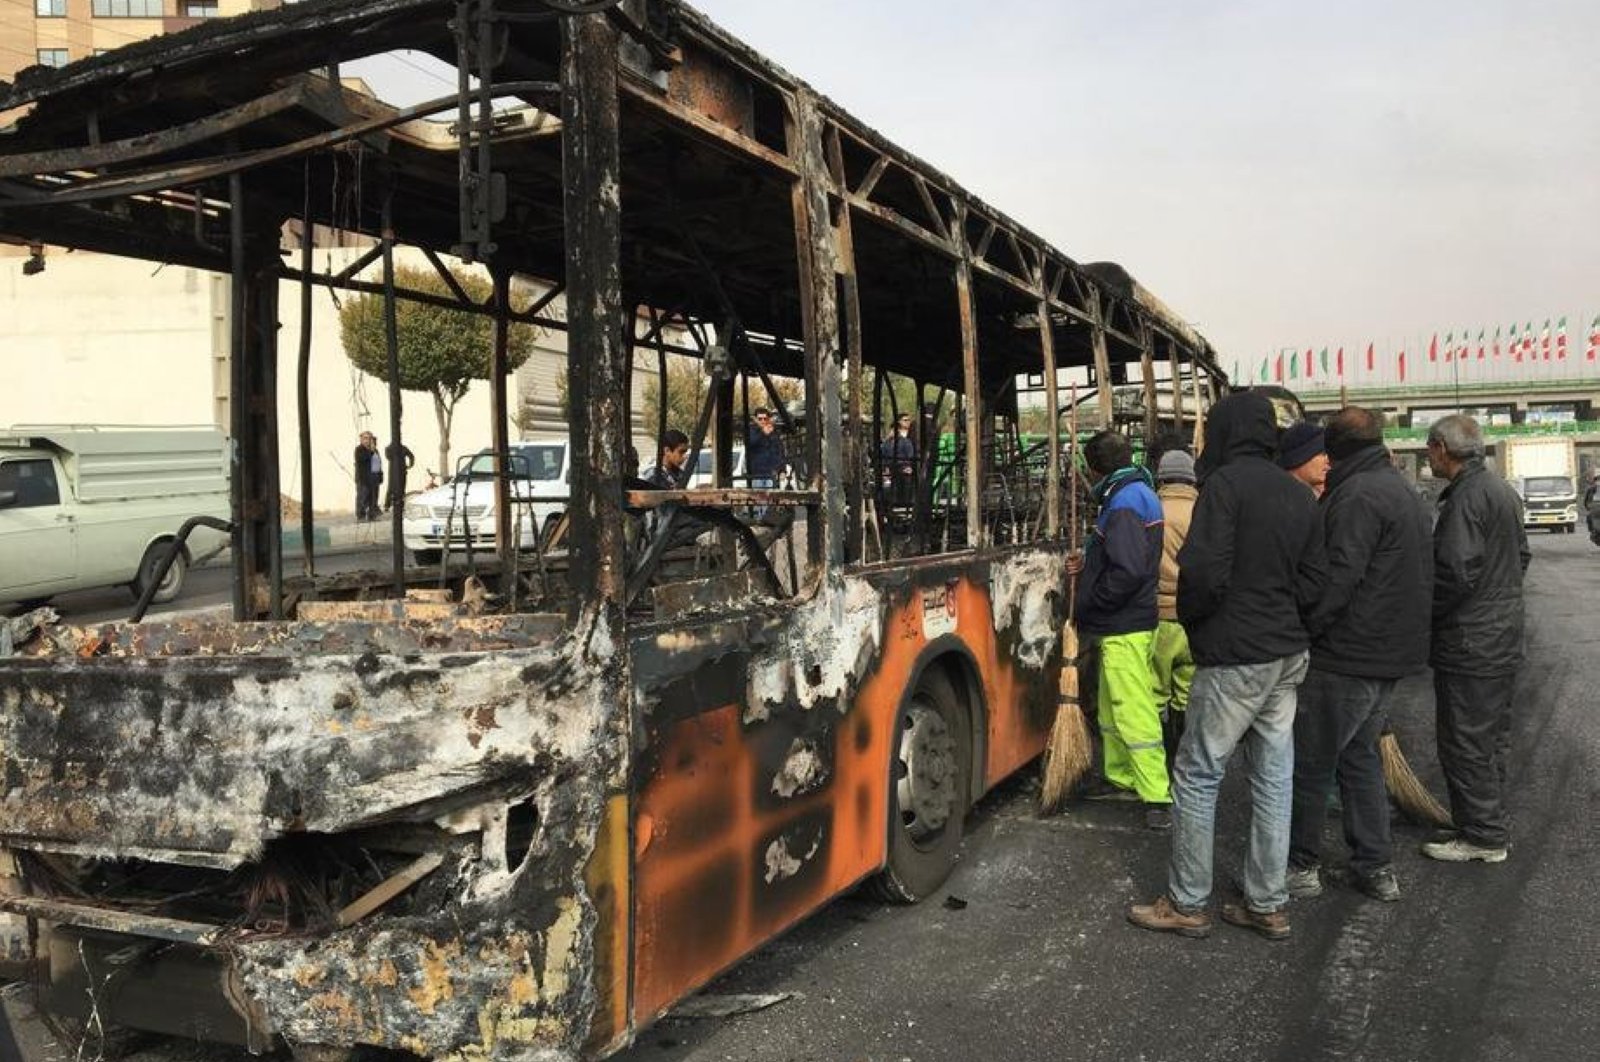 People gather around the wreckage of a public transportation bus that was burnt overnight during the protests over increasing fuel prices, Isfahan, central Iran, Nov. 17, 2019. (EPA-EFE Photo)